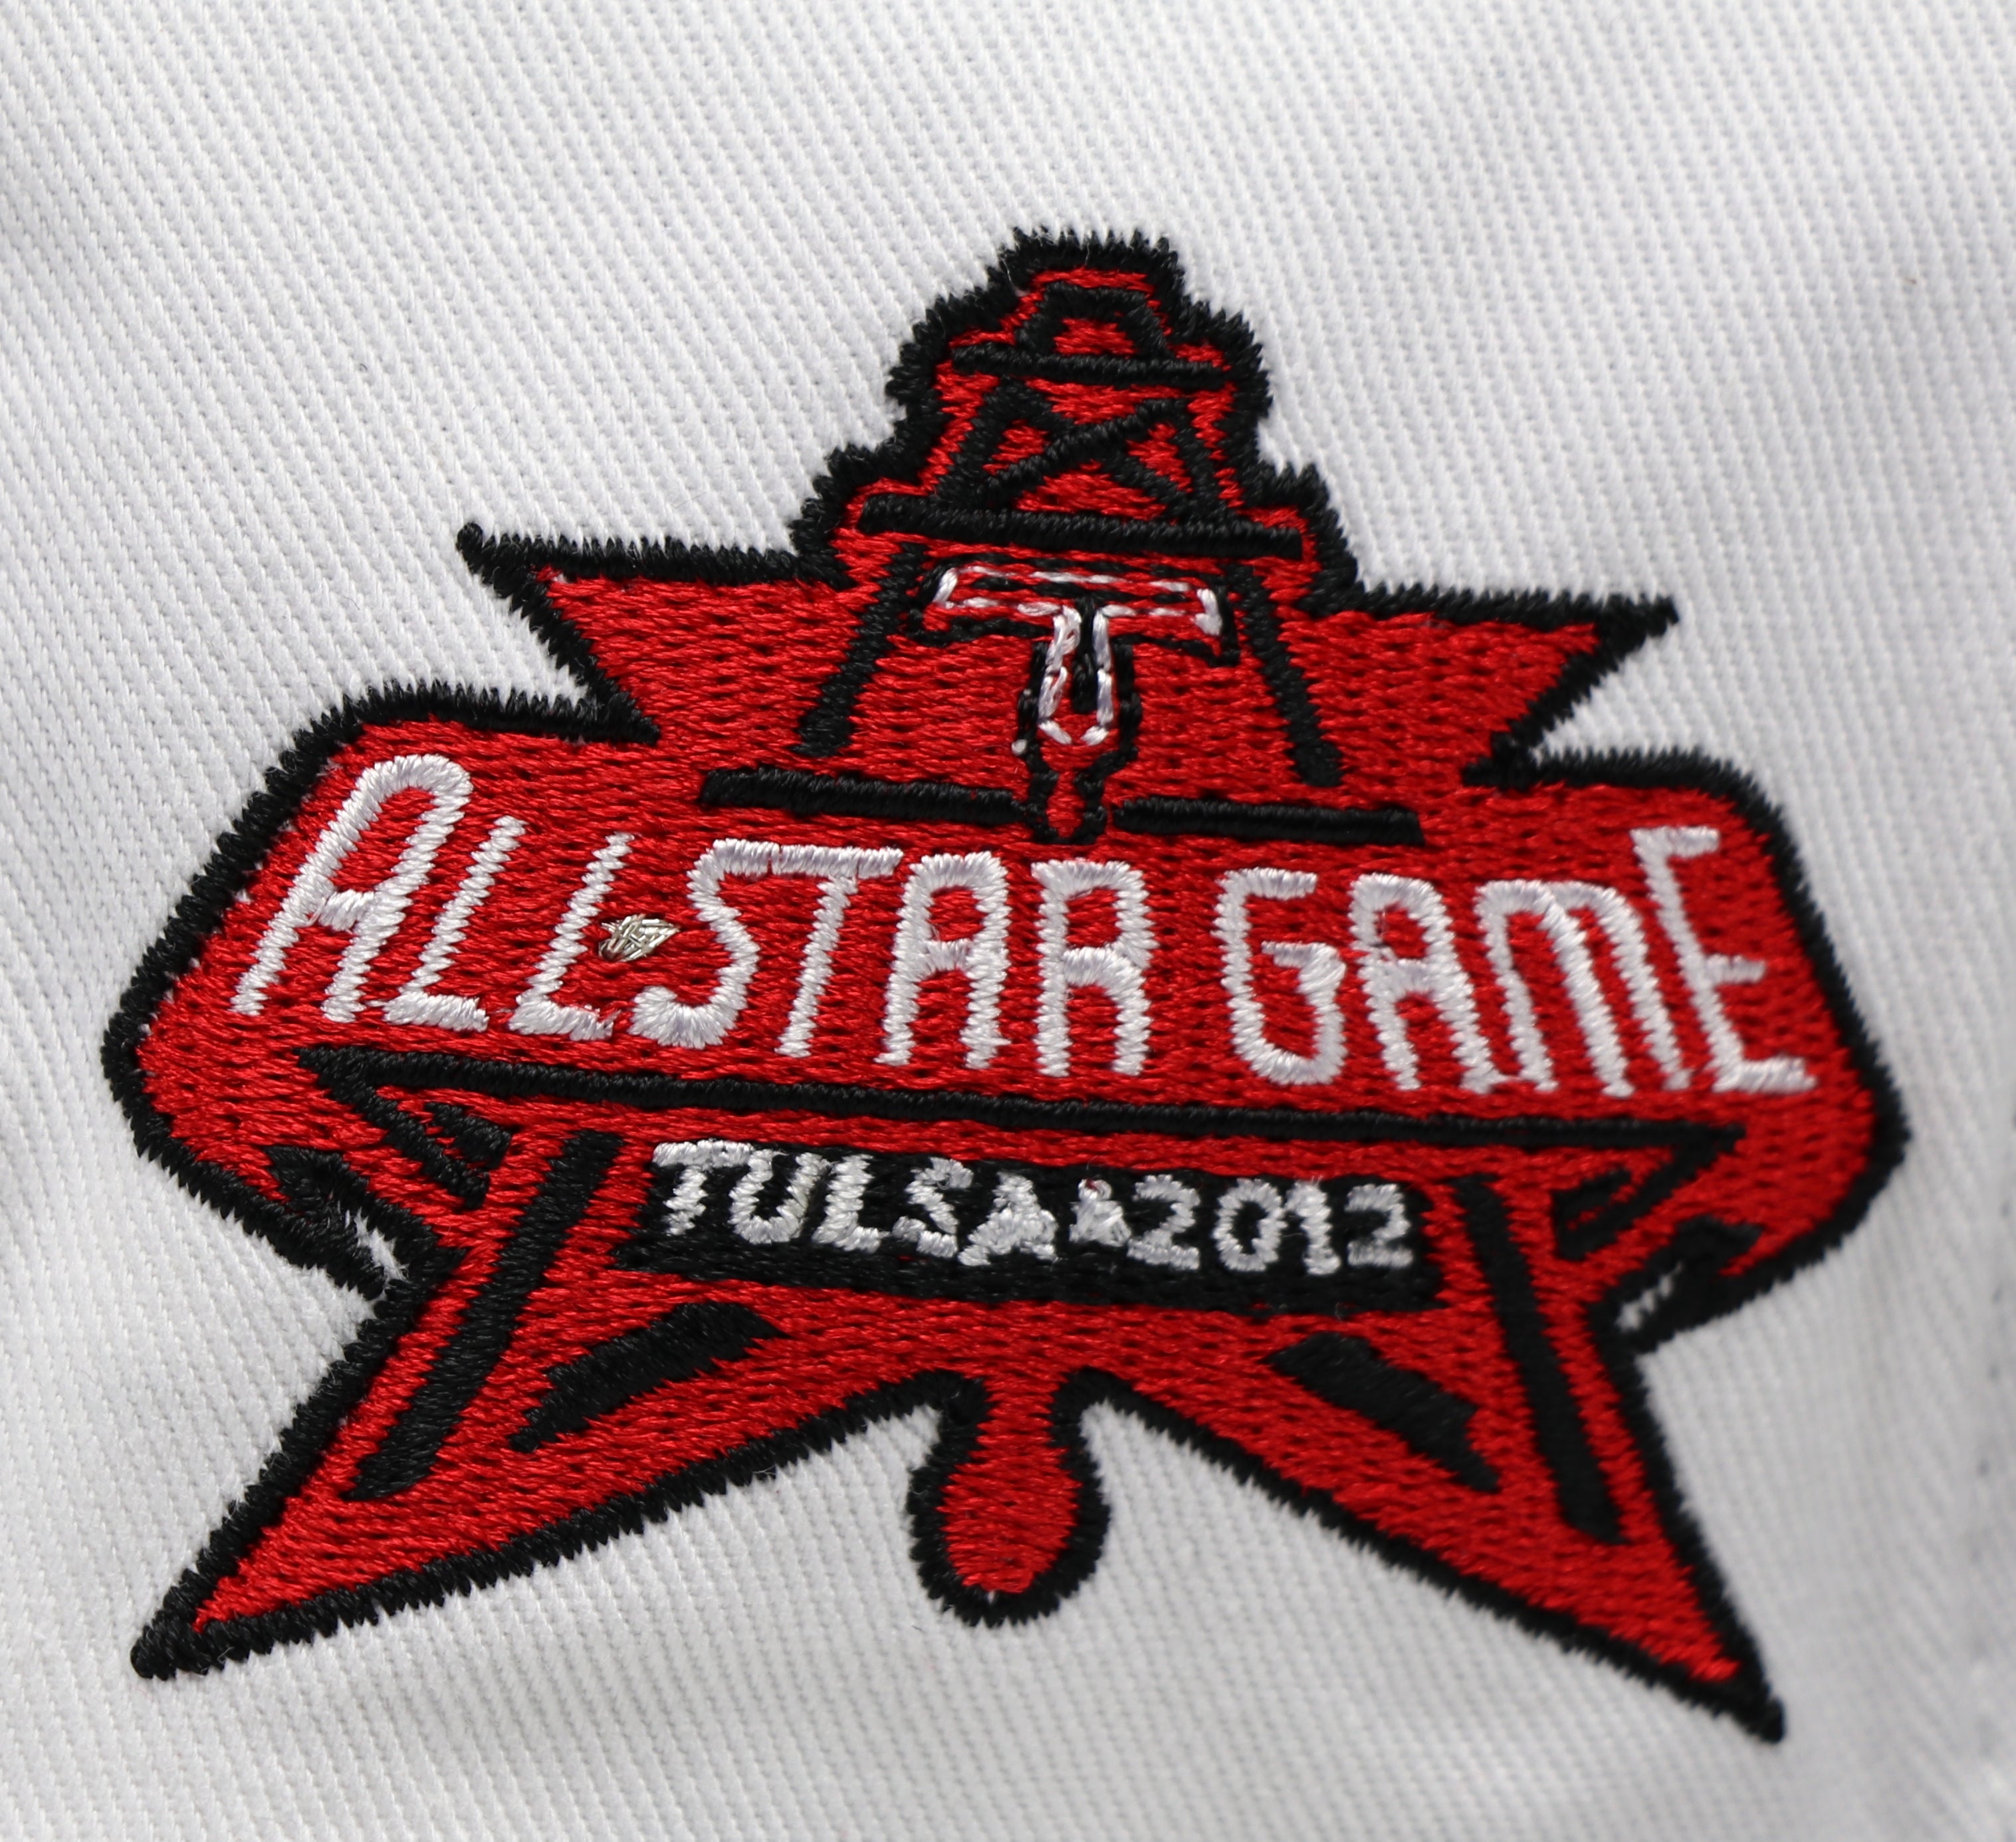 TULSA DRILLERS (2012 ALLSTARGAME) NEW ERA 59FIFTY FITTED (RED UNDER VISOR)